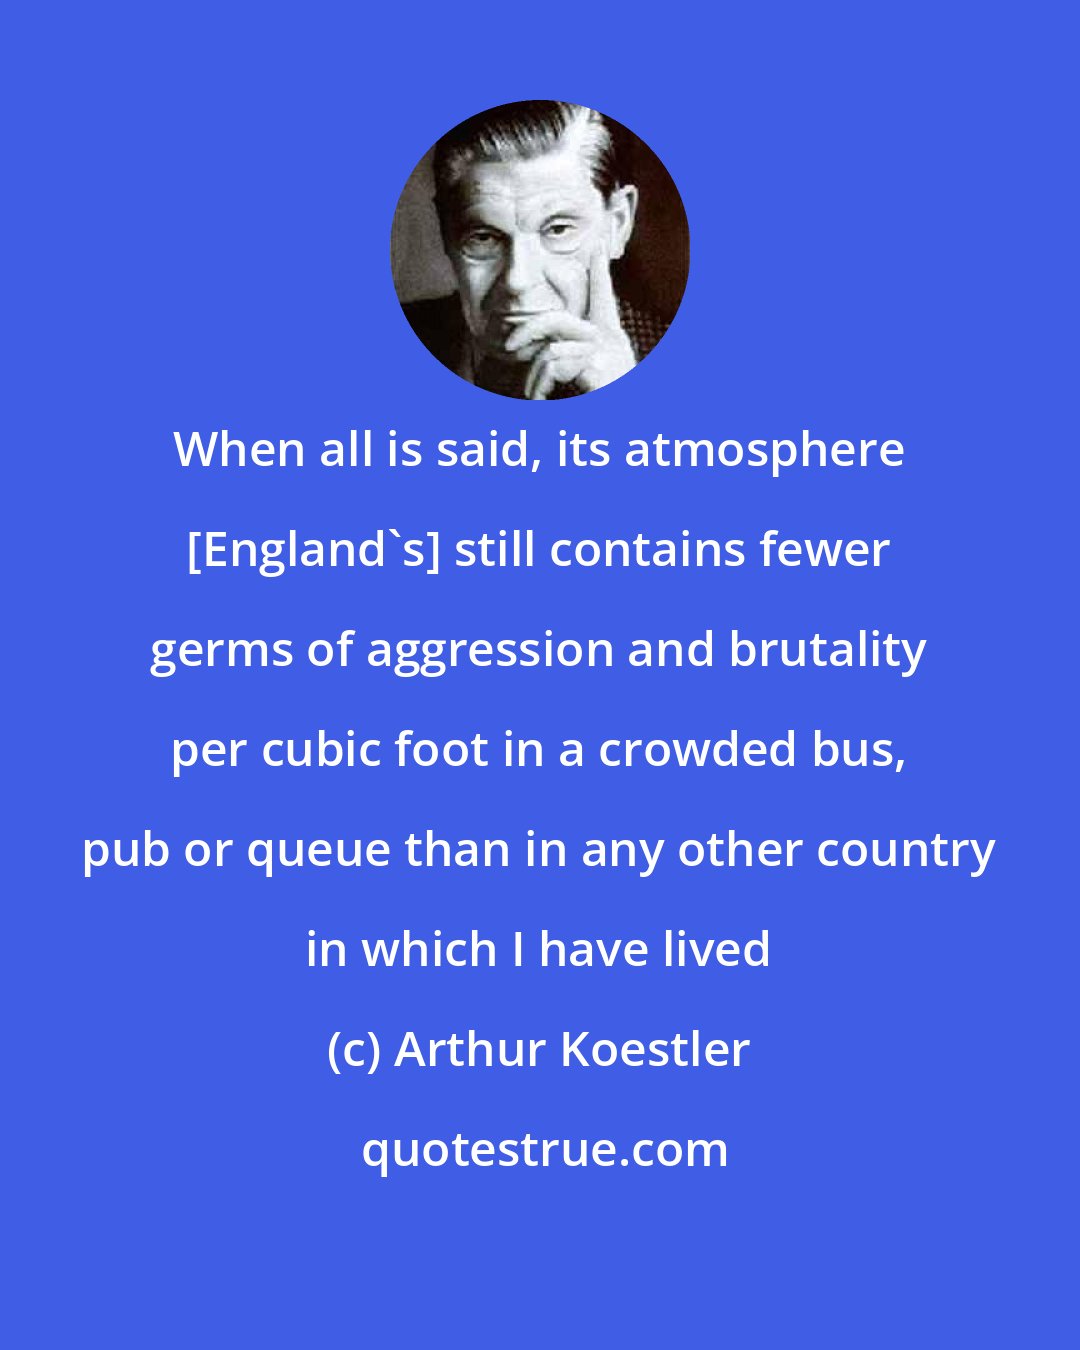 Arthur Koestler: When all is said, its atmosphere [England's] still contains fewer germs of aggression and brutality per cubic foot in a crowded bus, pub or queue than in any other country in which I have lived